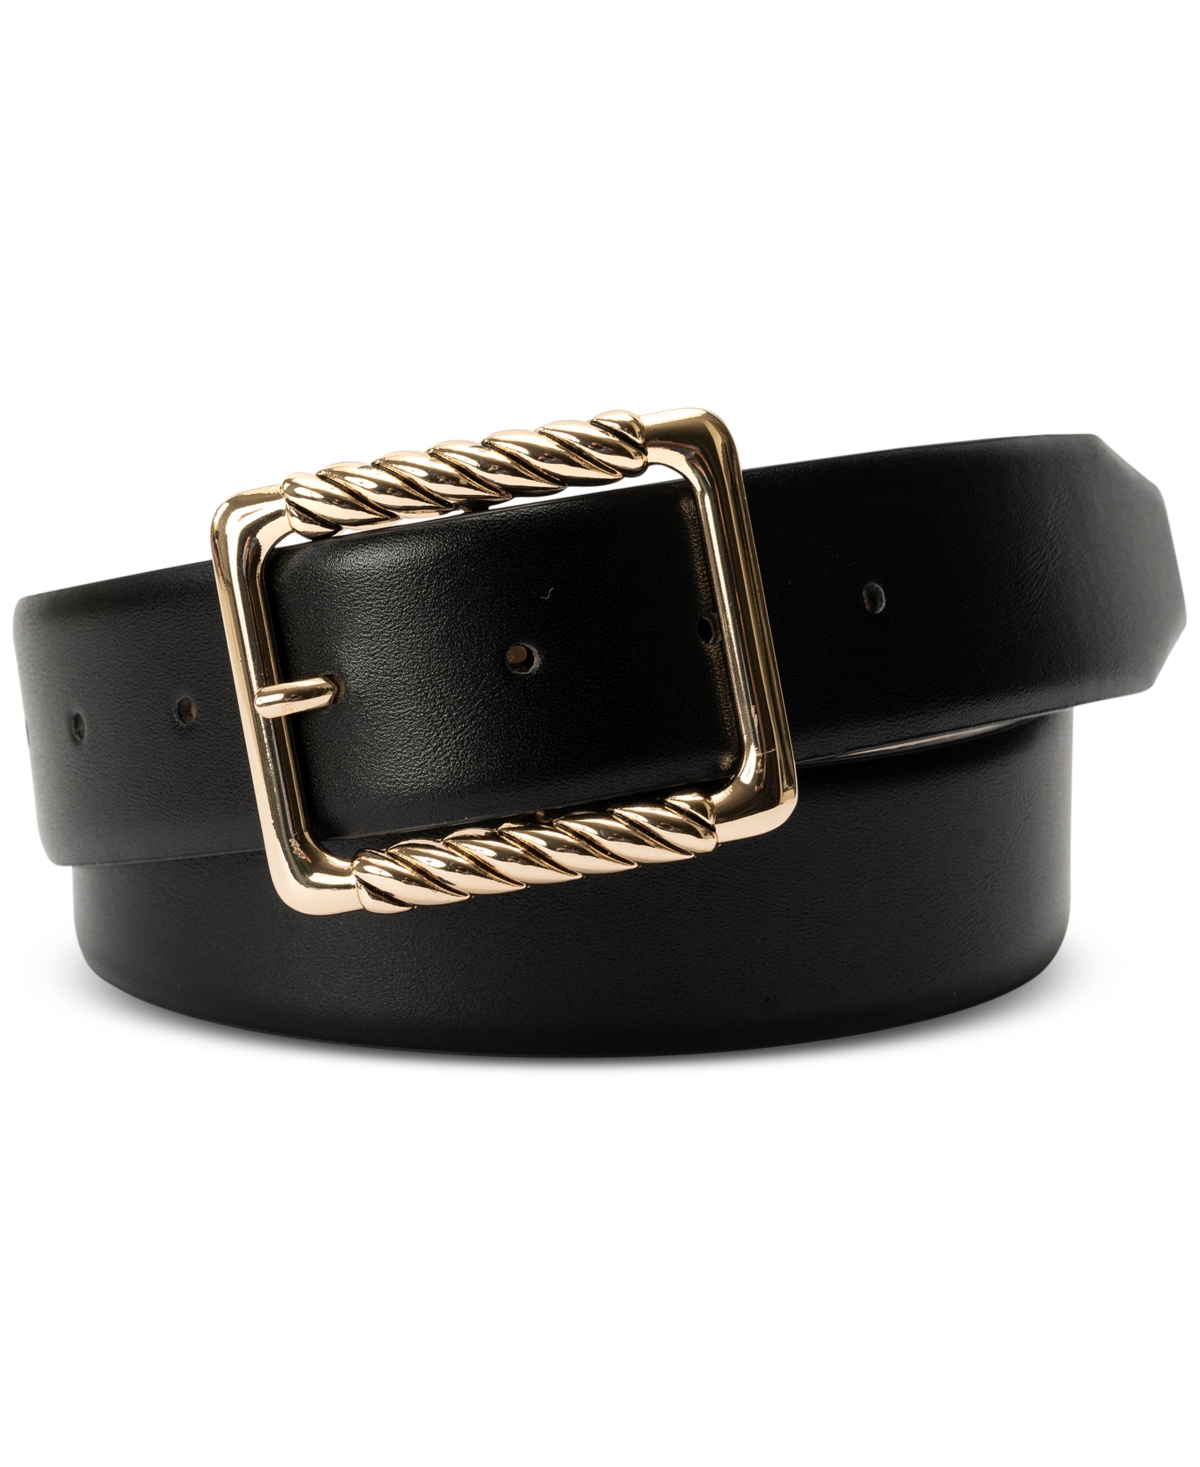 Metal Wrapped Buckle Belt, Created for Macy's - Cognac